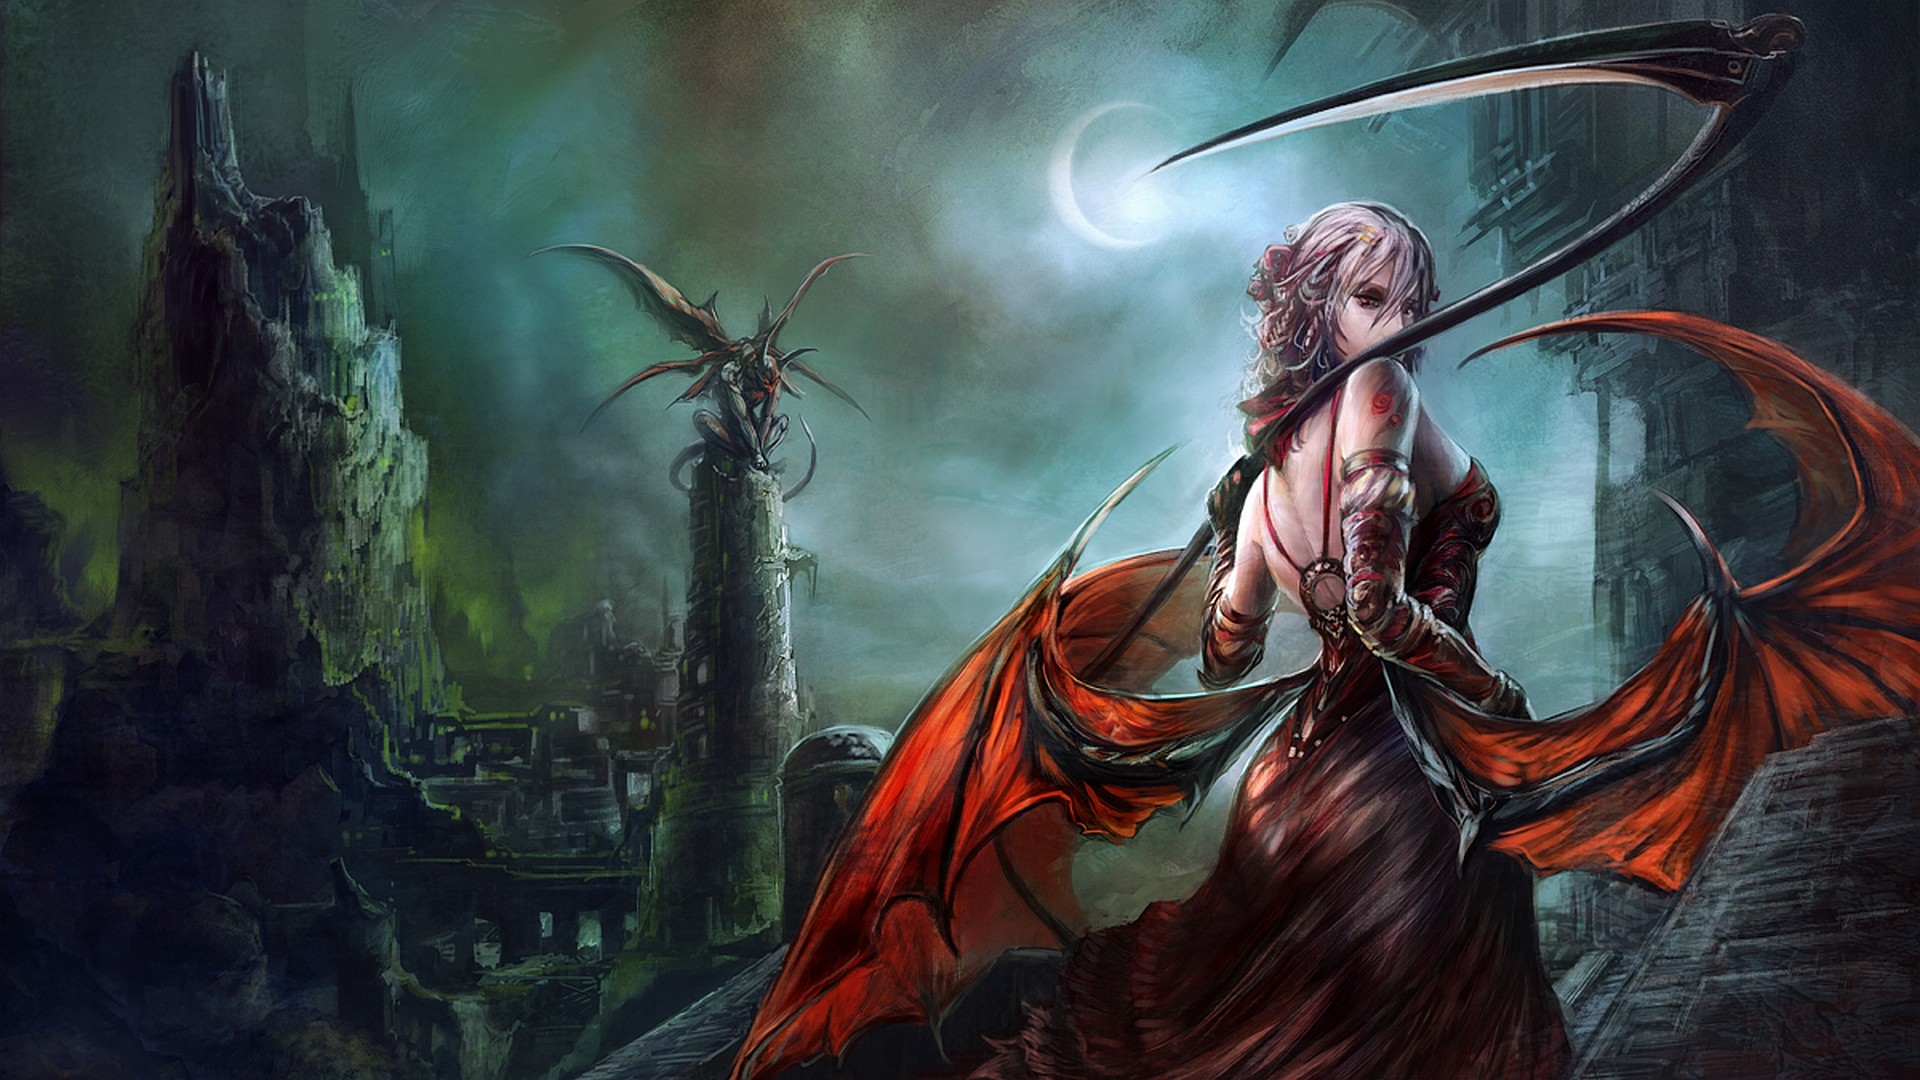 1920x1080 Fantasy - Women Warrior Wallpapers and Backgrounds ID : 169072